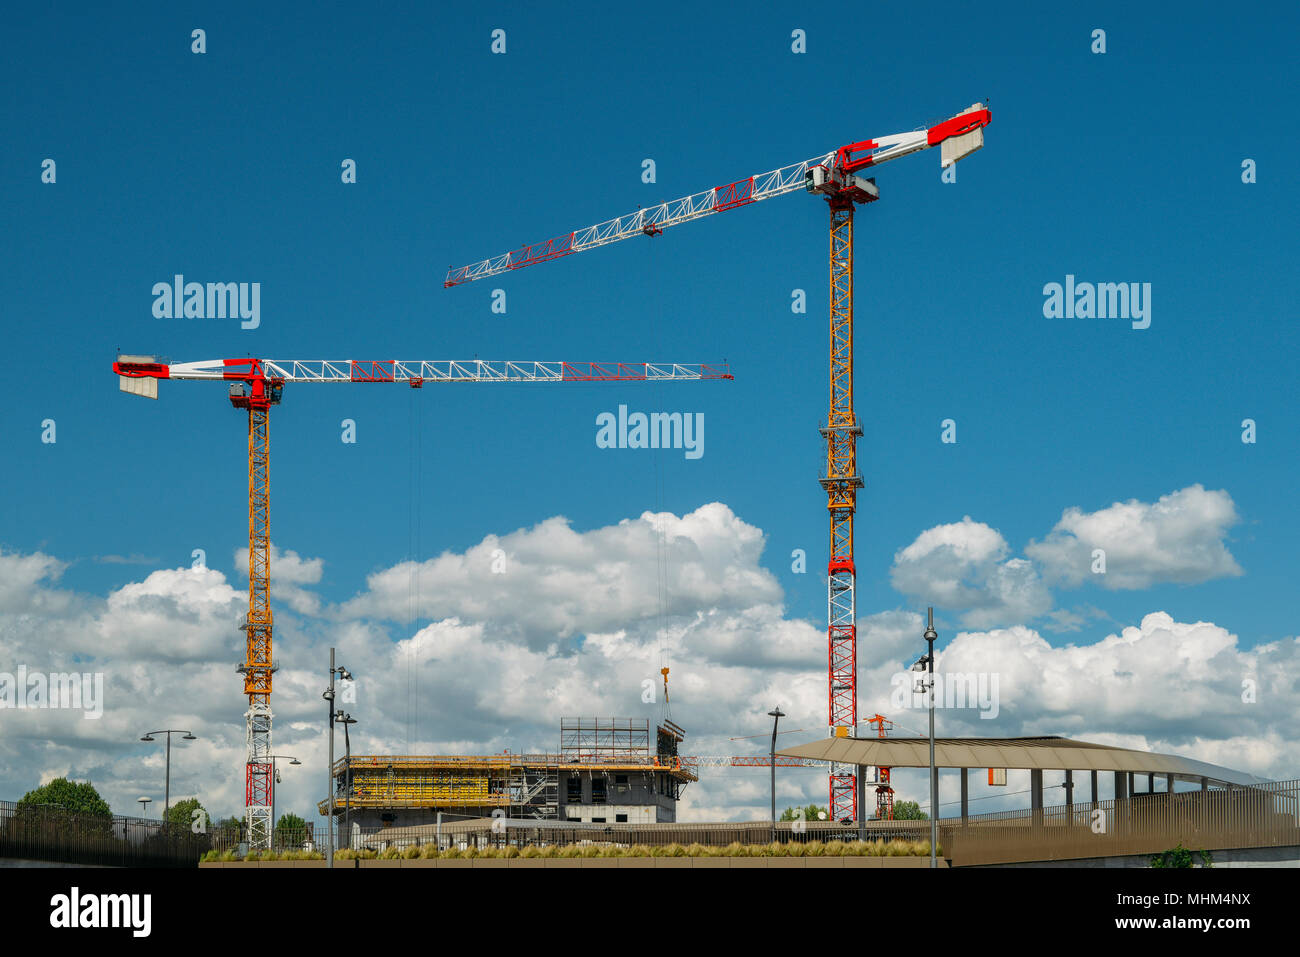 Construction cranes and unidentifiable construction workers at a building site with blue sky and copy space. Stock Photo